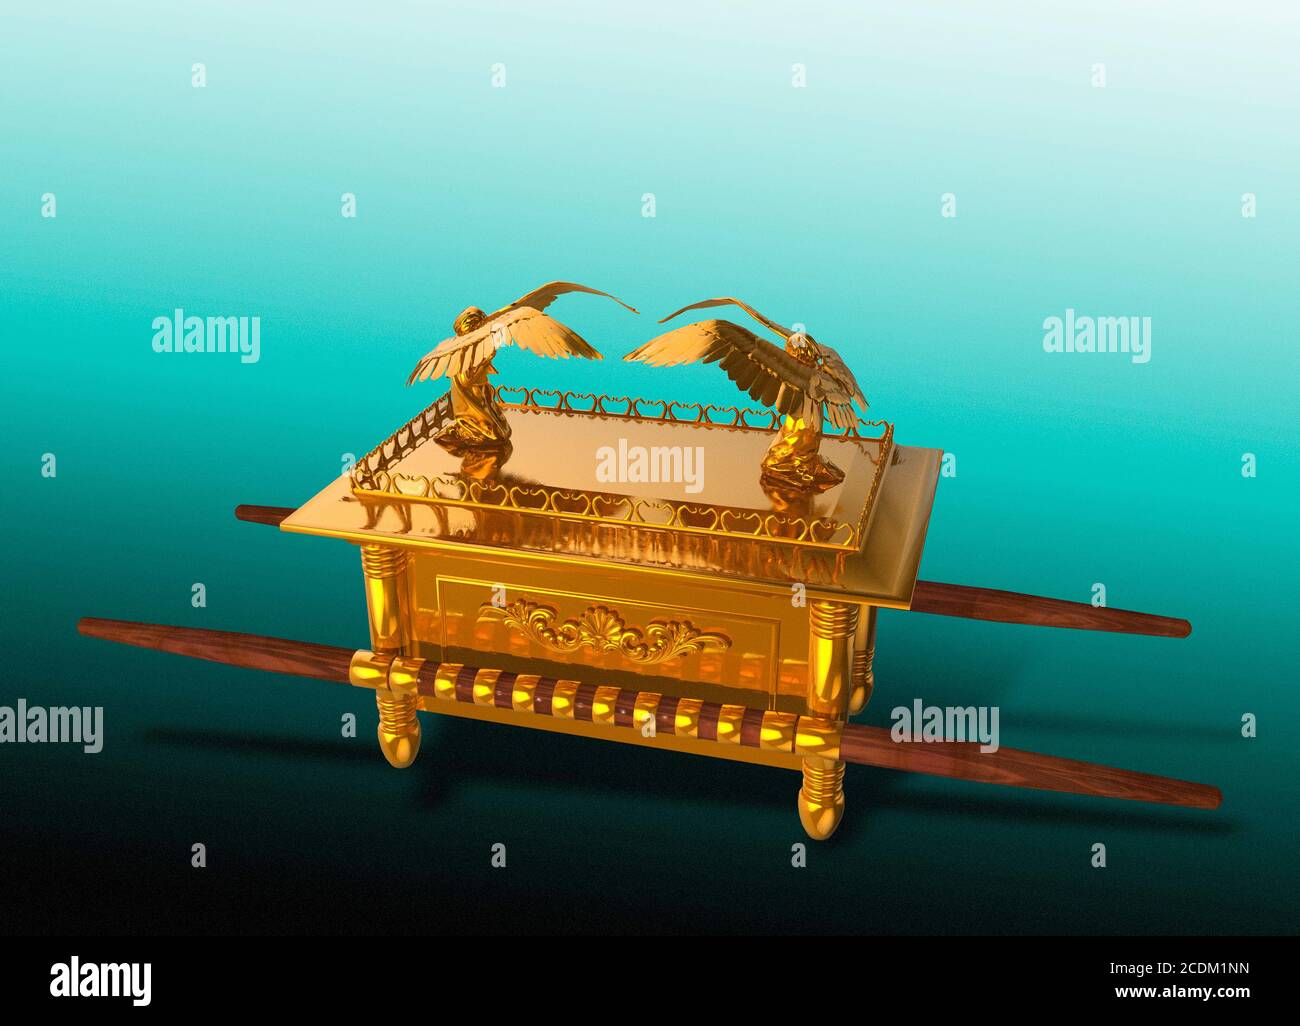 Ark of the Covenant, conceptual illustration. Stock Photo